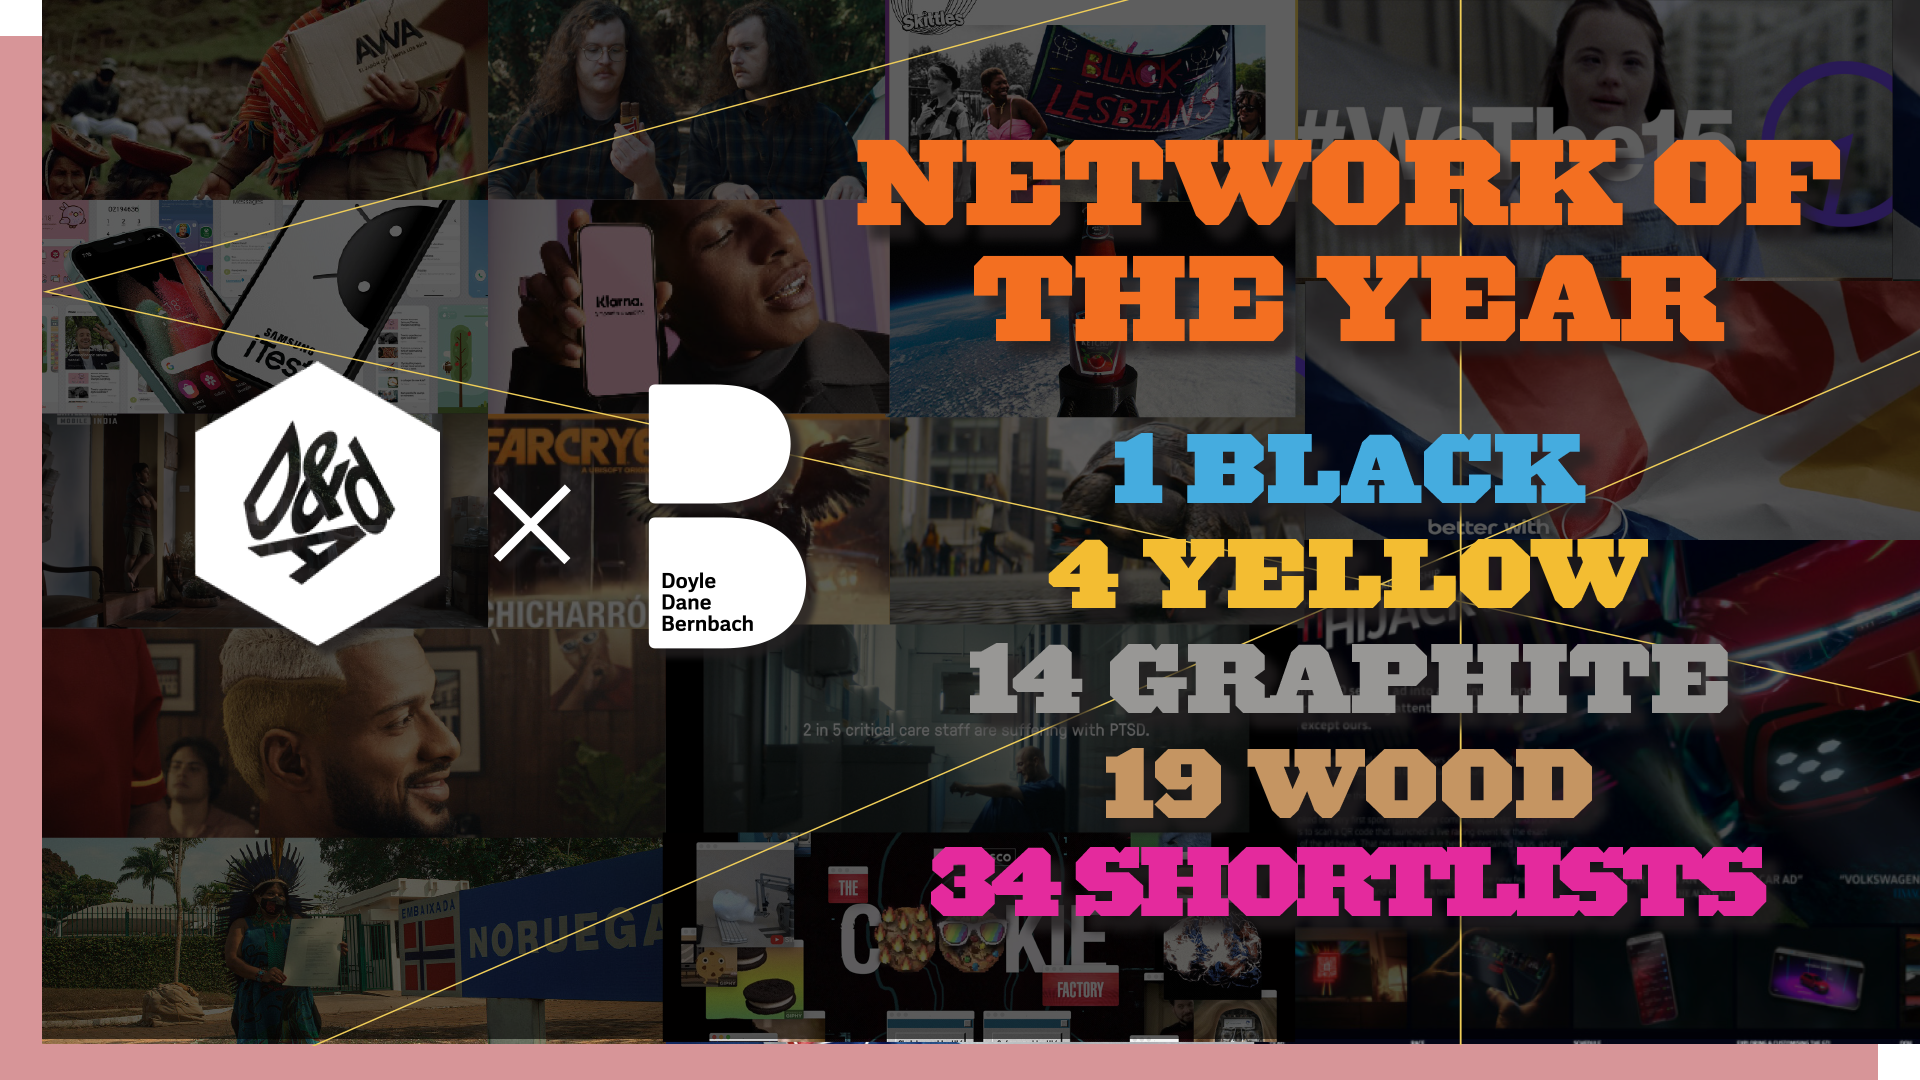 DDB Named D&AD Network of the Year